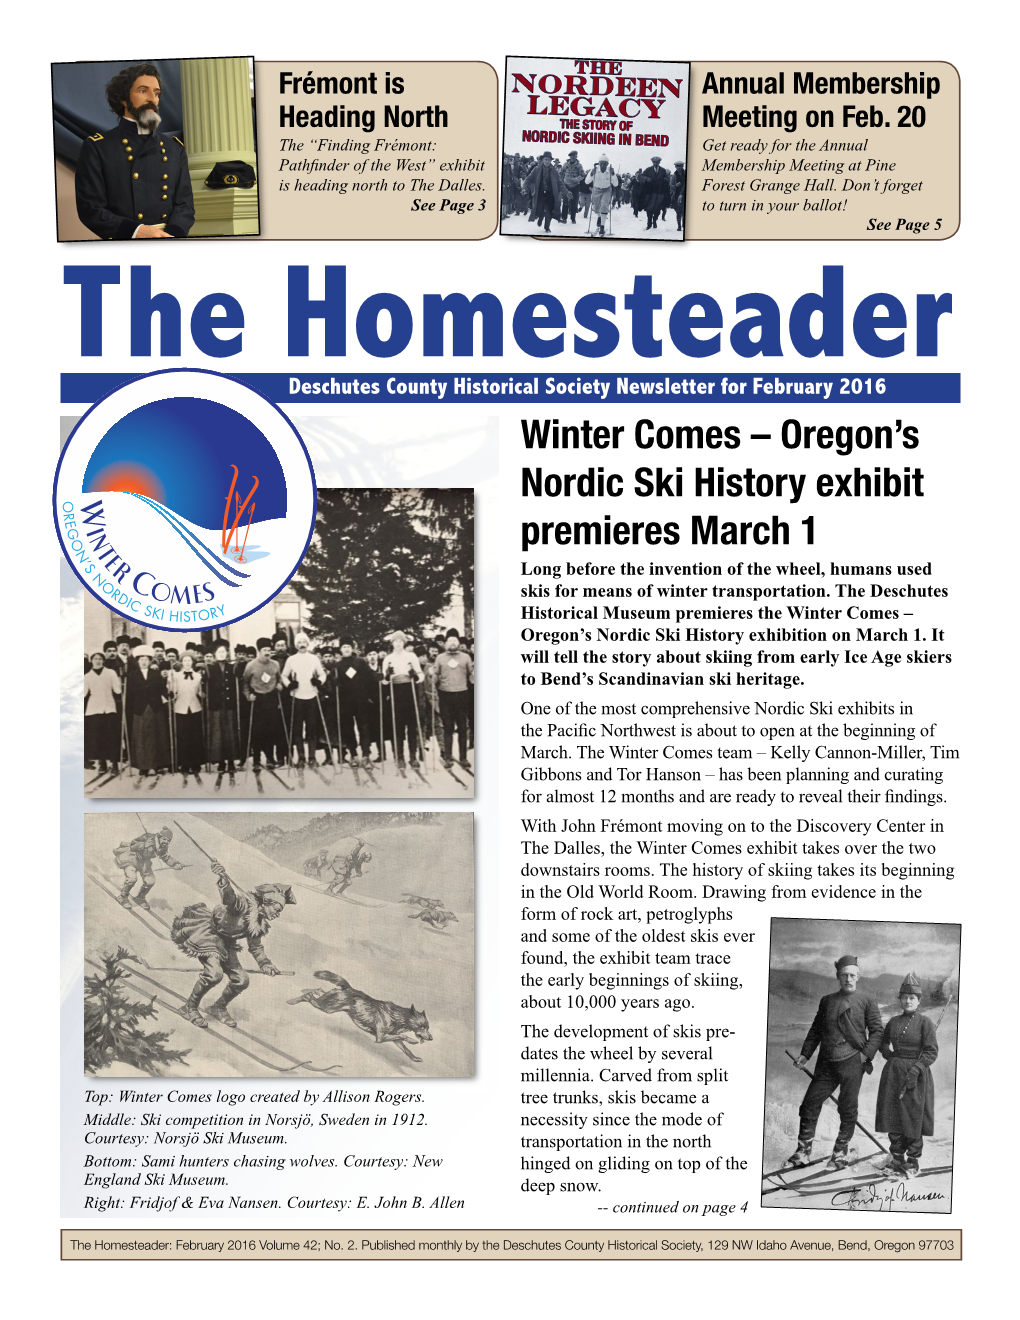 Winter Comes – Oregon’S Nordic Ski History Exhibit Premieres March 1 Long Before the Invention of the Wheel, Humans Used Skis for Means of Winter Transportation